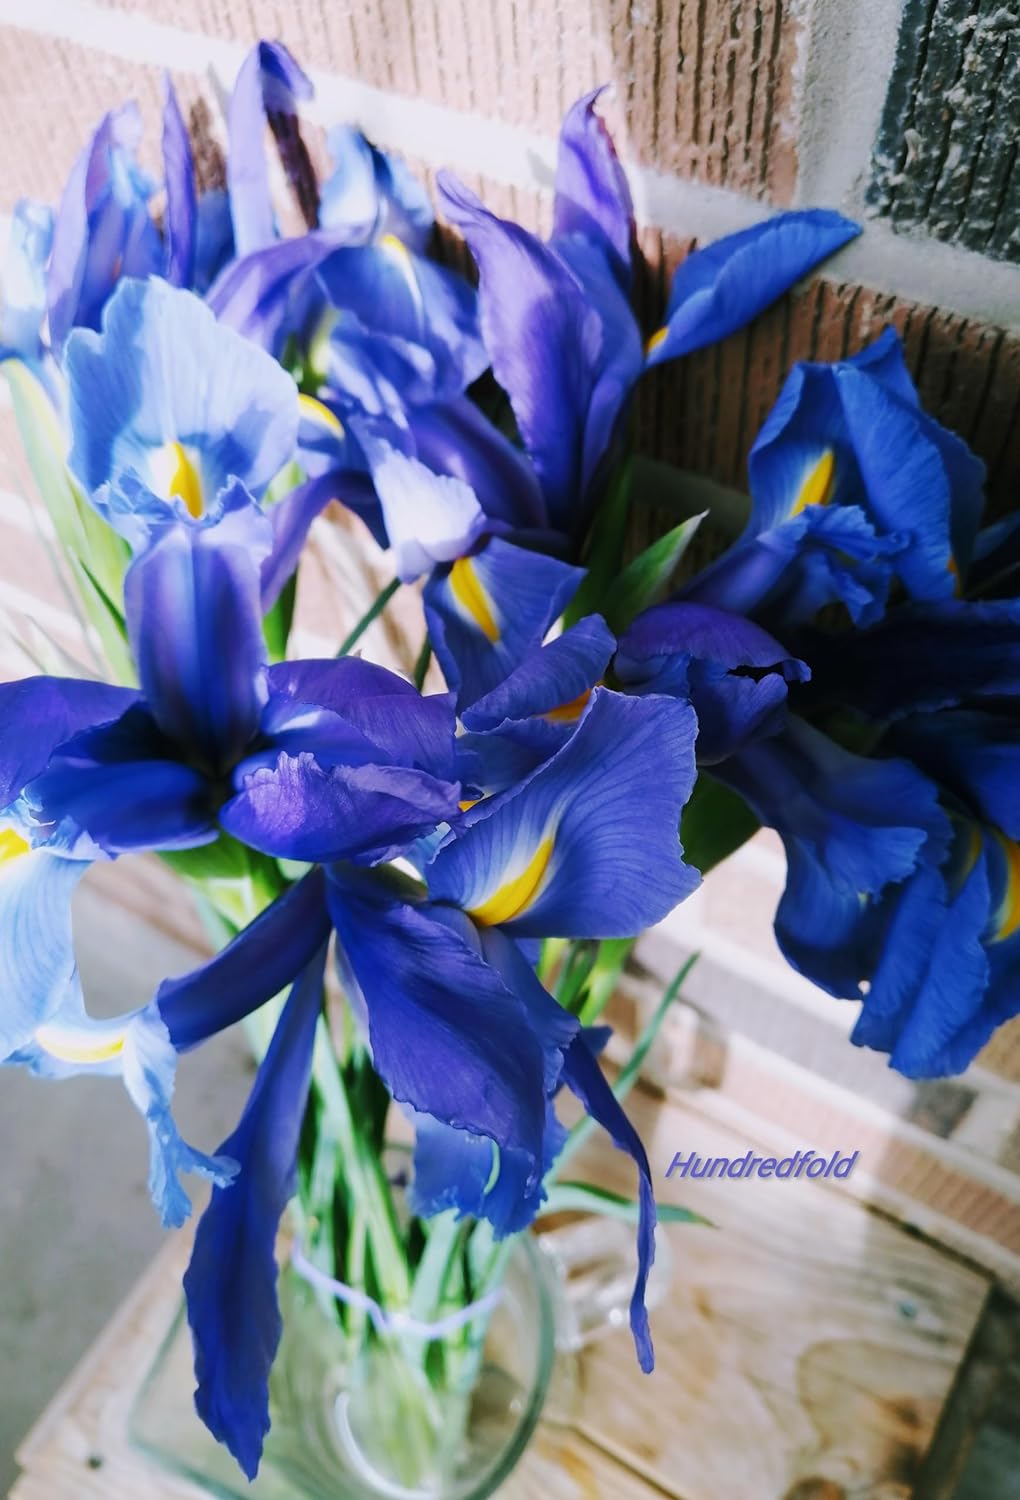 Hundredfold 20 Blue Flag Iris Wildflower Seeds – Iris versicolor Canada Native Flower, Large Blue Iris, Northern Blueflag, Excellent for Ponds and Bogs, Flower Beds and Borders